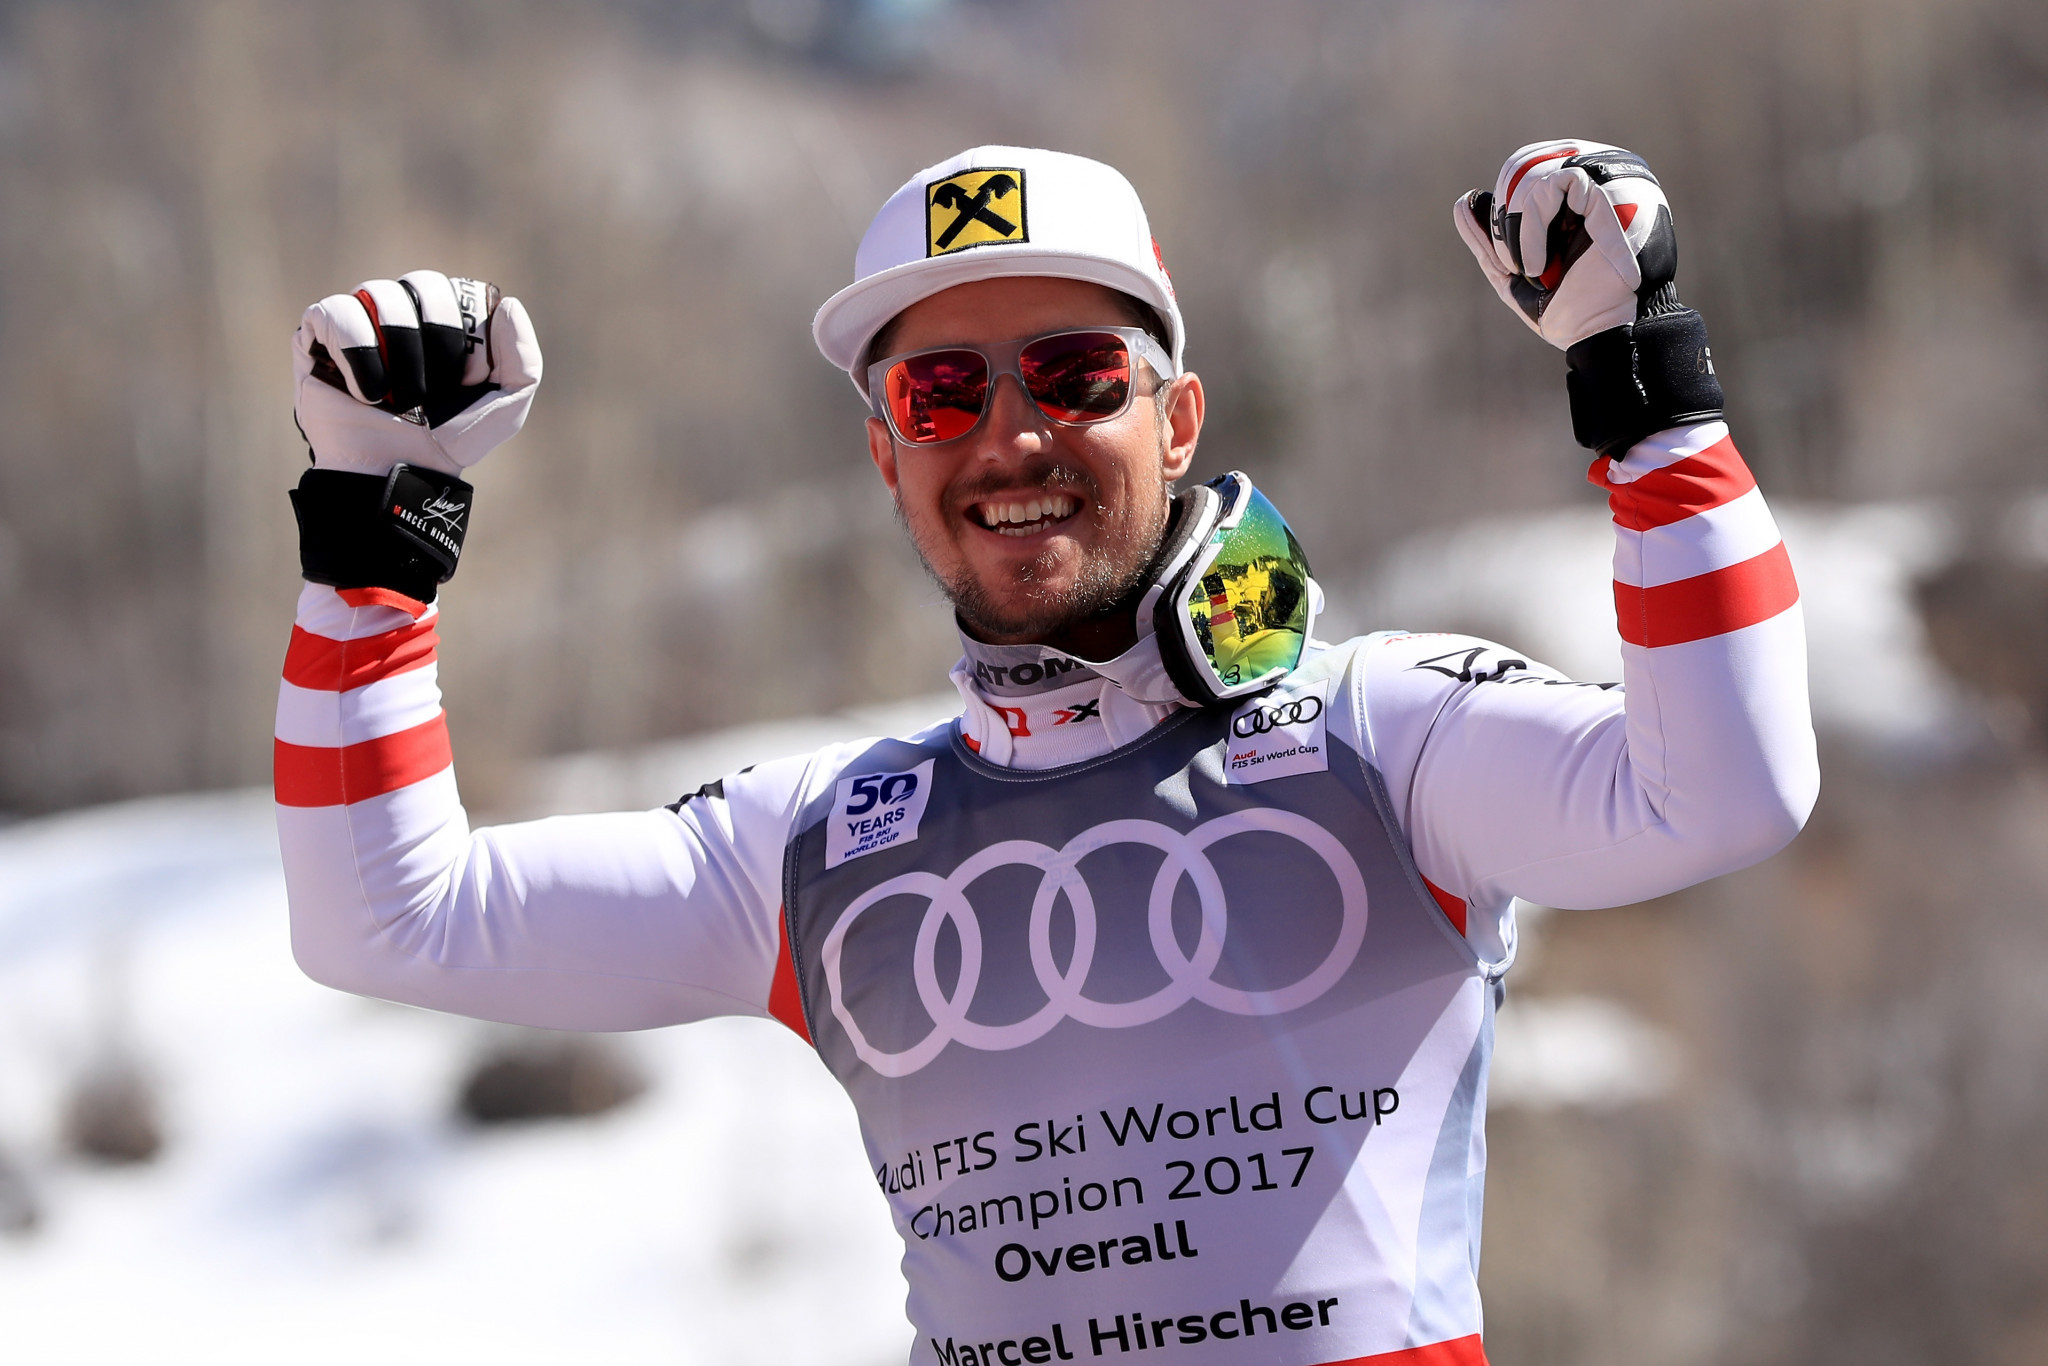 Austria's Marcel Hirscher will compete at the FIS Alpine World Cup in Levi after recovering from a broken ankle ©Getty Images